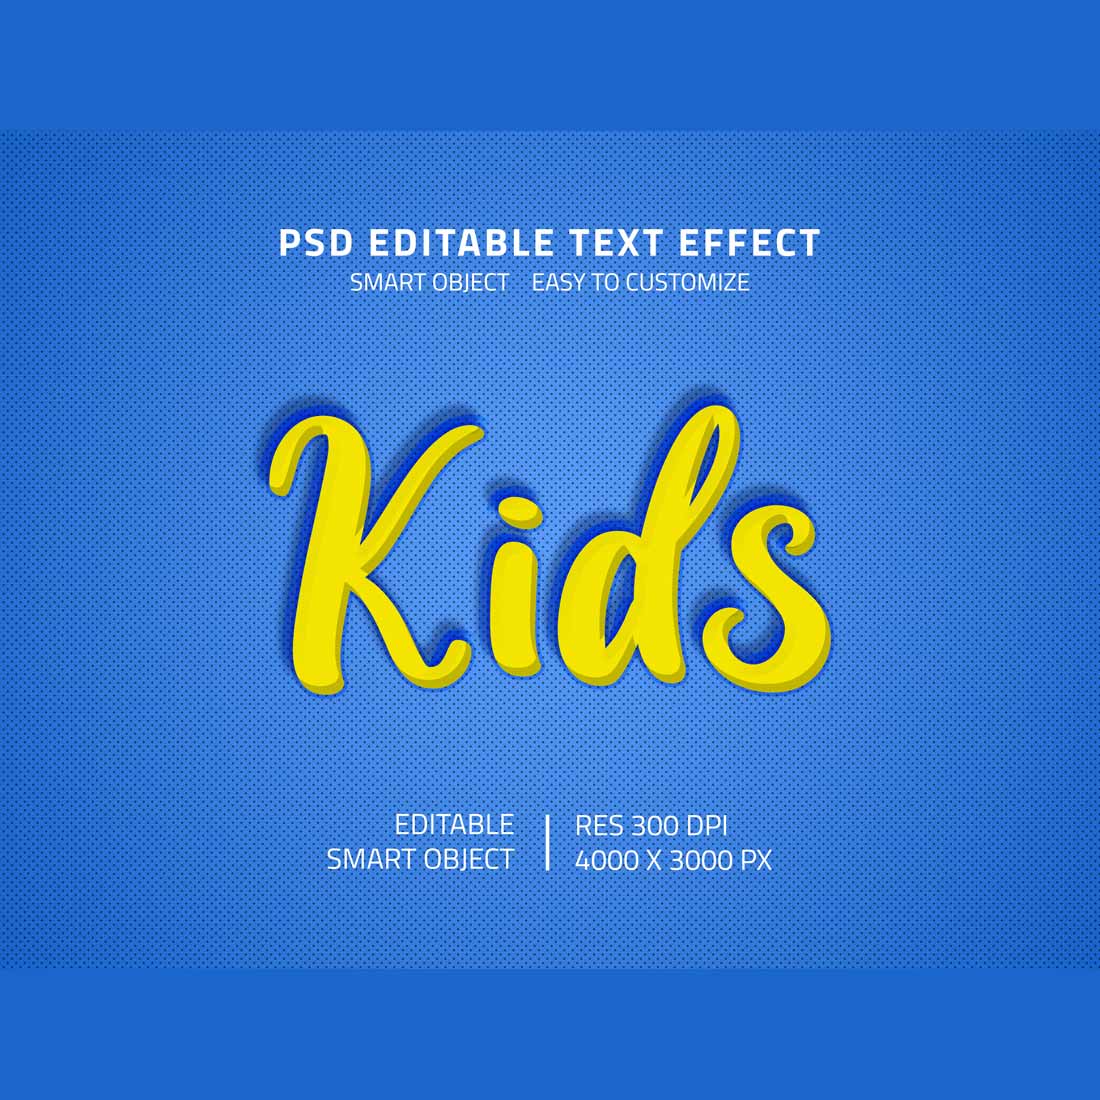 Kids Editable Psd Text Effect cover image.